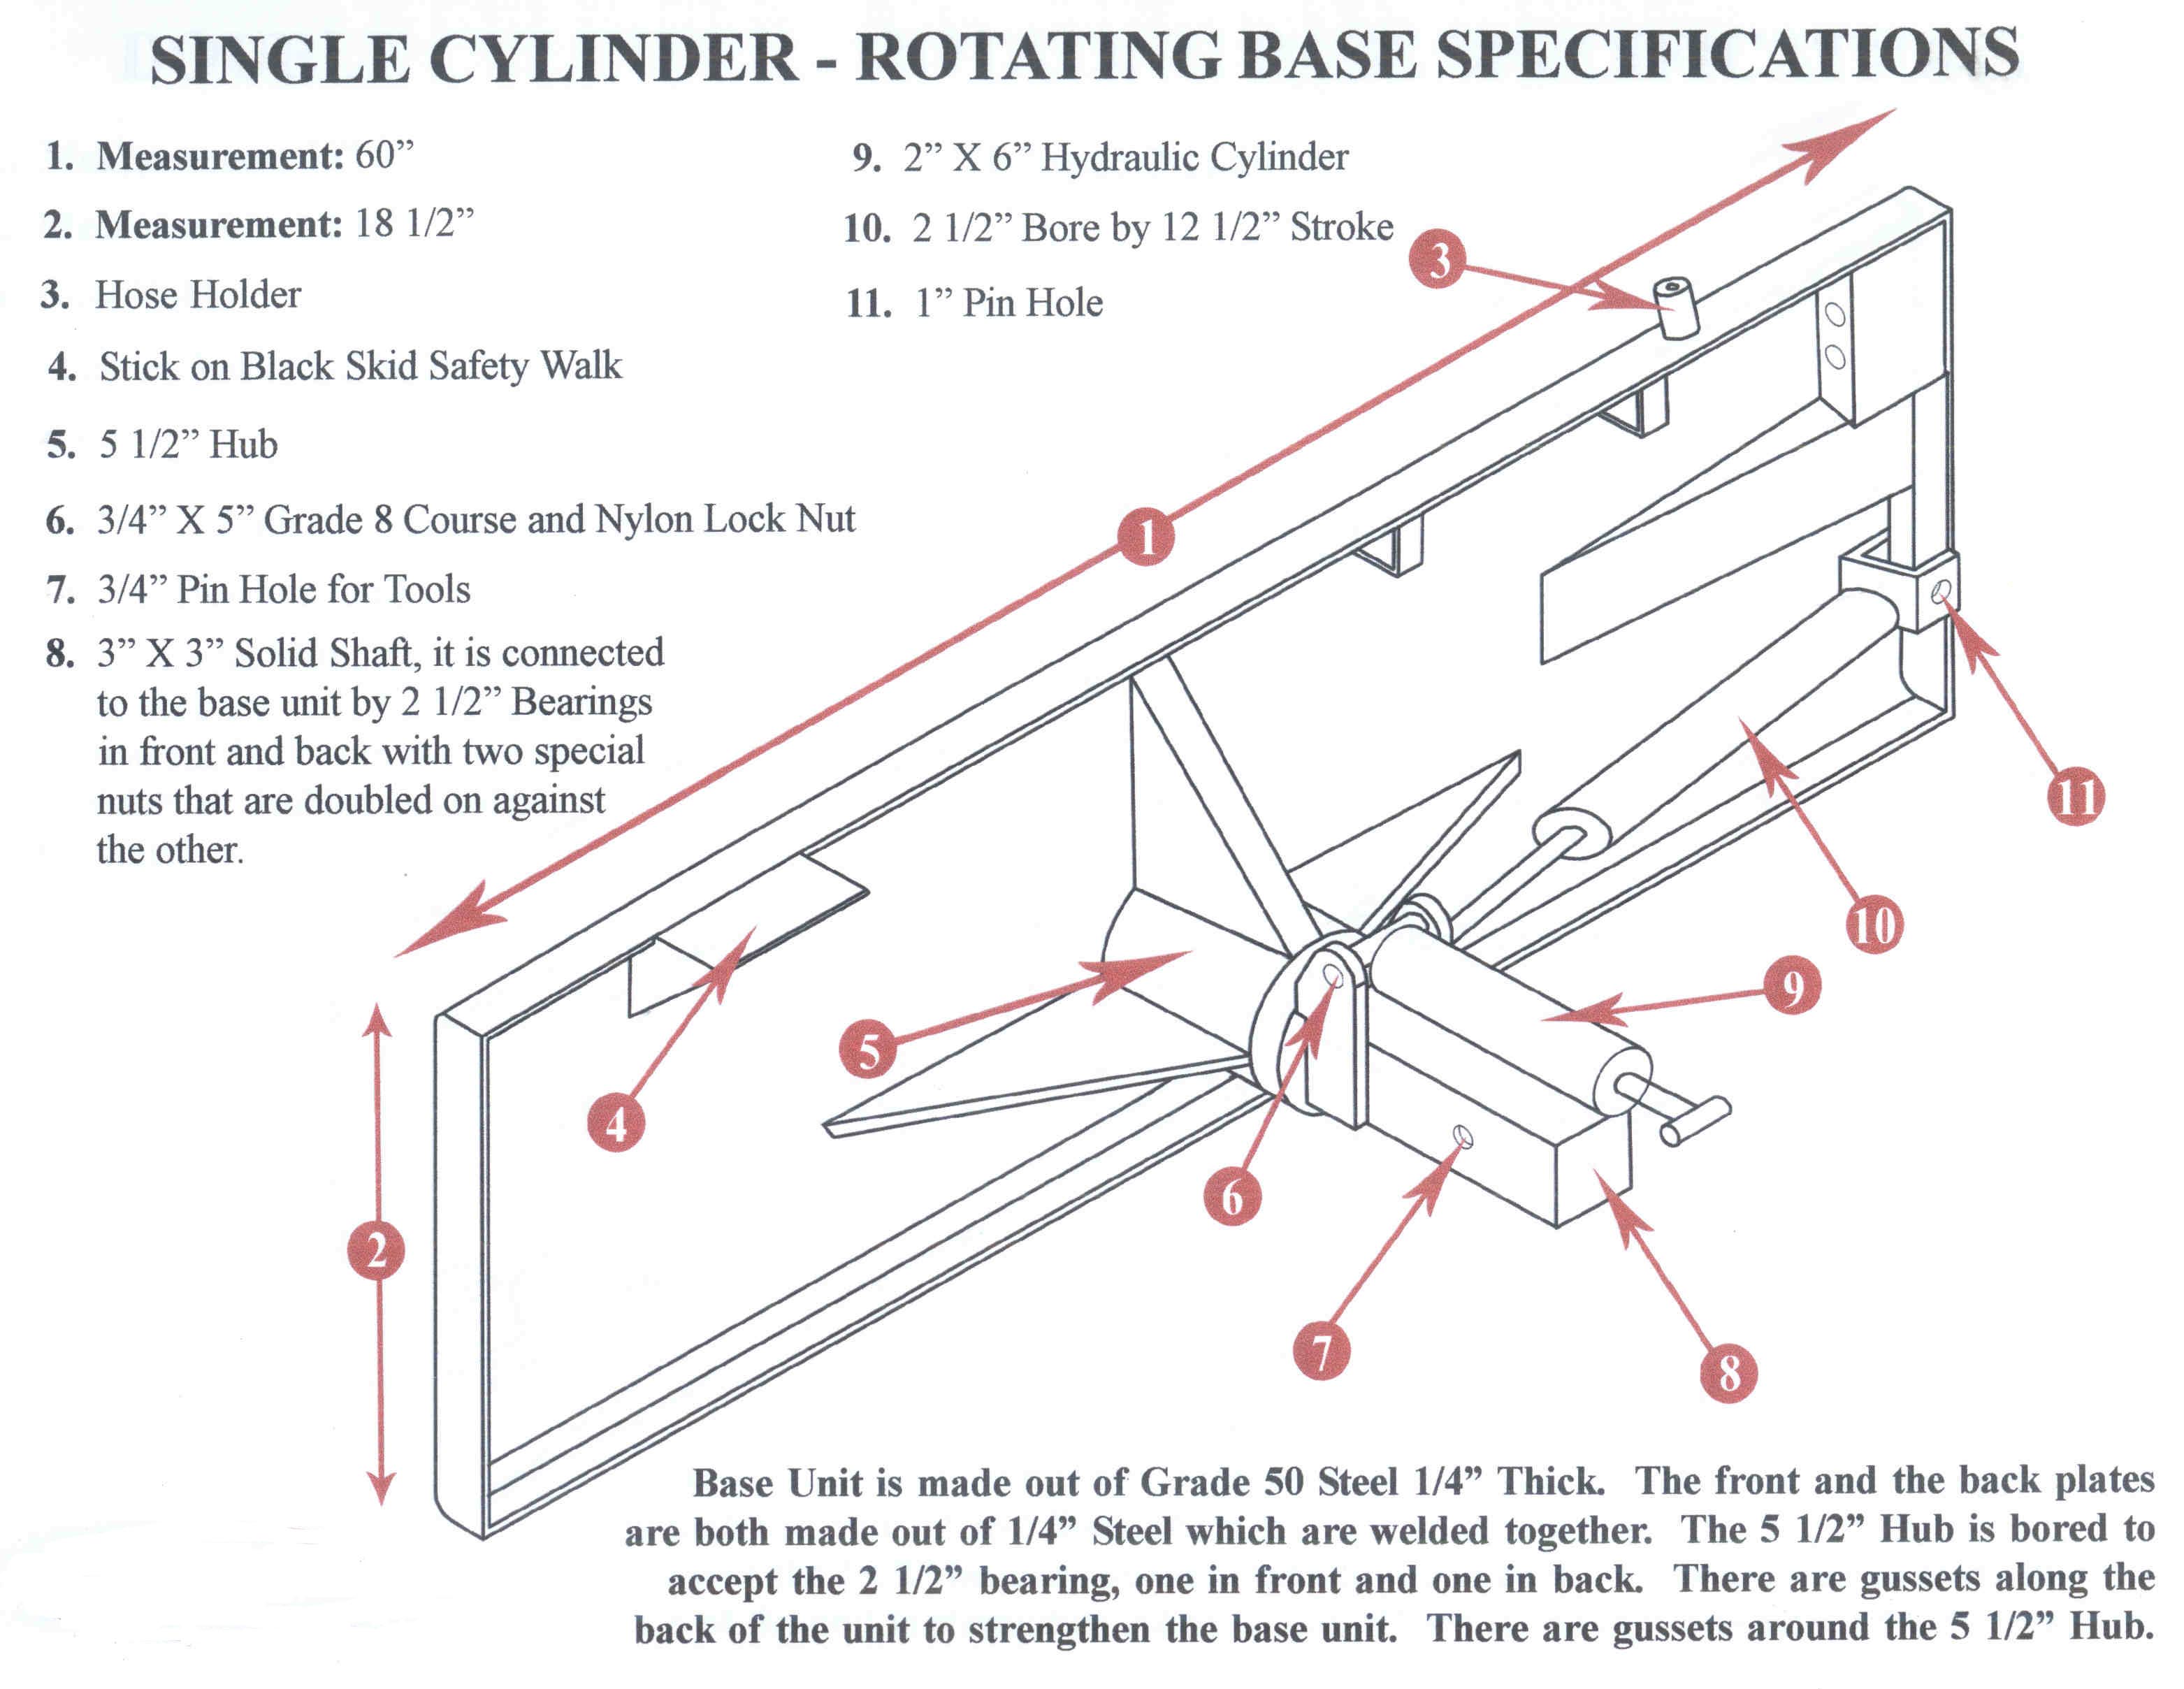 Specifications On Single Cylinder Rotating Base Plate